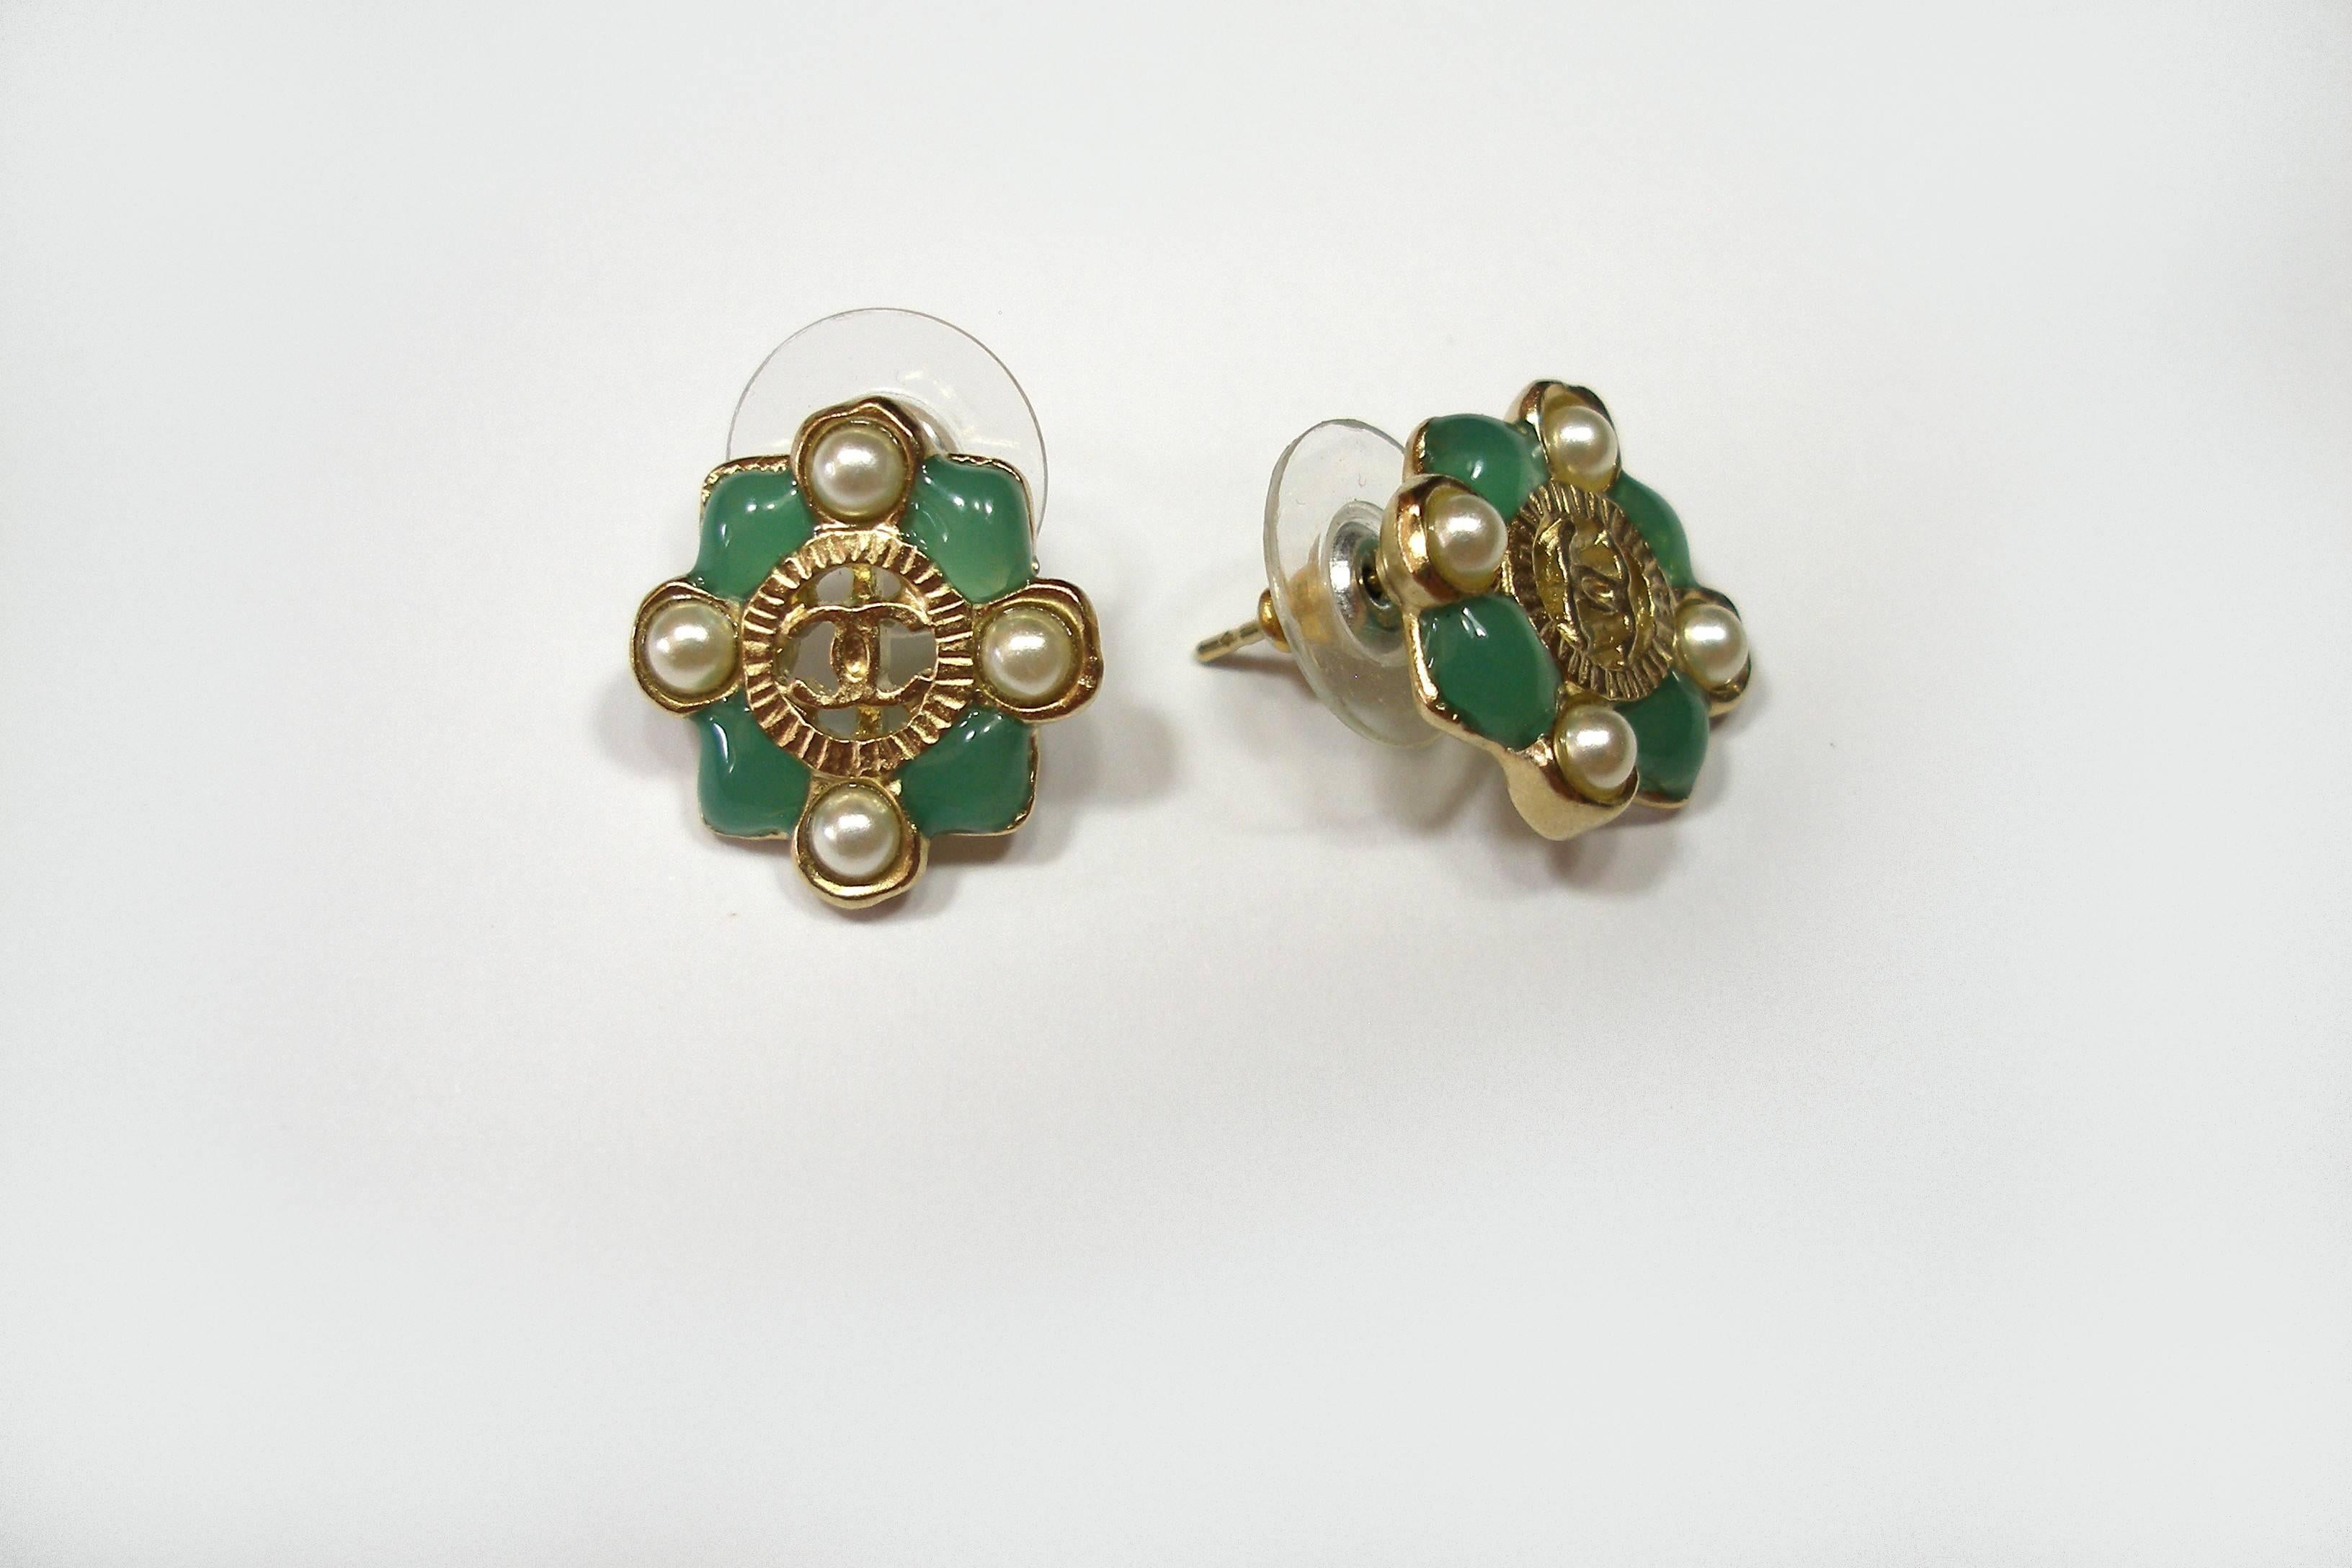 Beautiful Chanel CC translucent green earrings with champagne gold métal
CC logo in the middle and 4 beads
Green and crème color 
Code date : A16CCP
Small size
Dimensions : 1.5 X 1.5 cm 
its comes with Chanel box and ribbon
INTERNATIONALS BUYERS